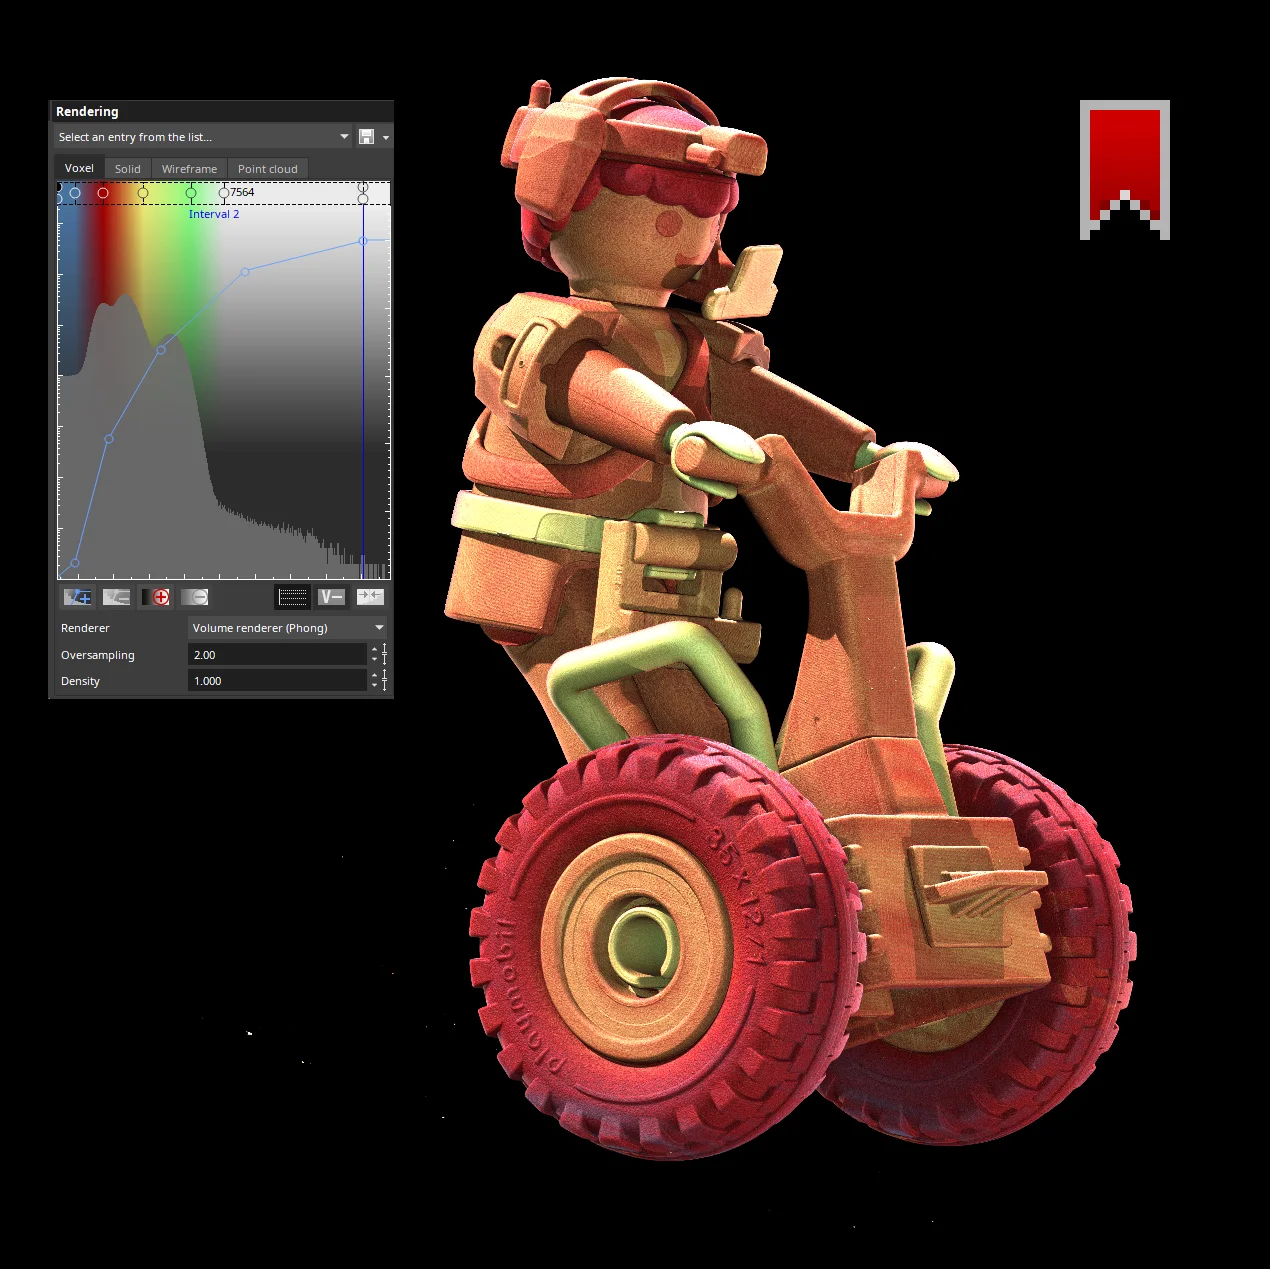 Colorful 3D rendering of the toy with the rendering settings